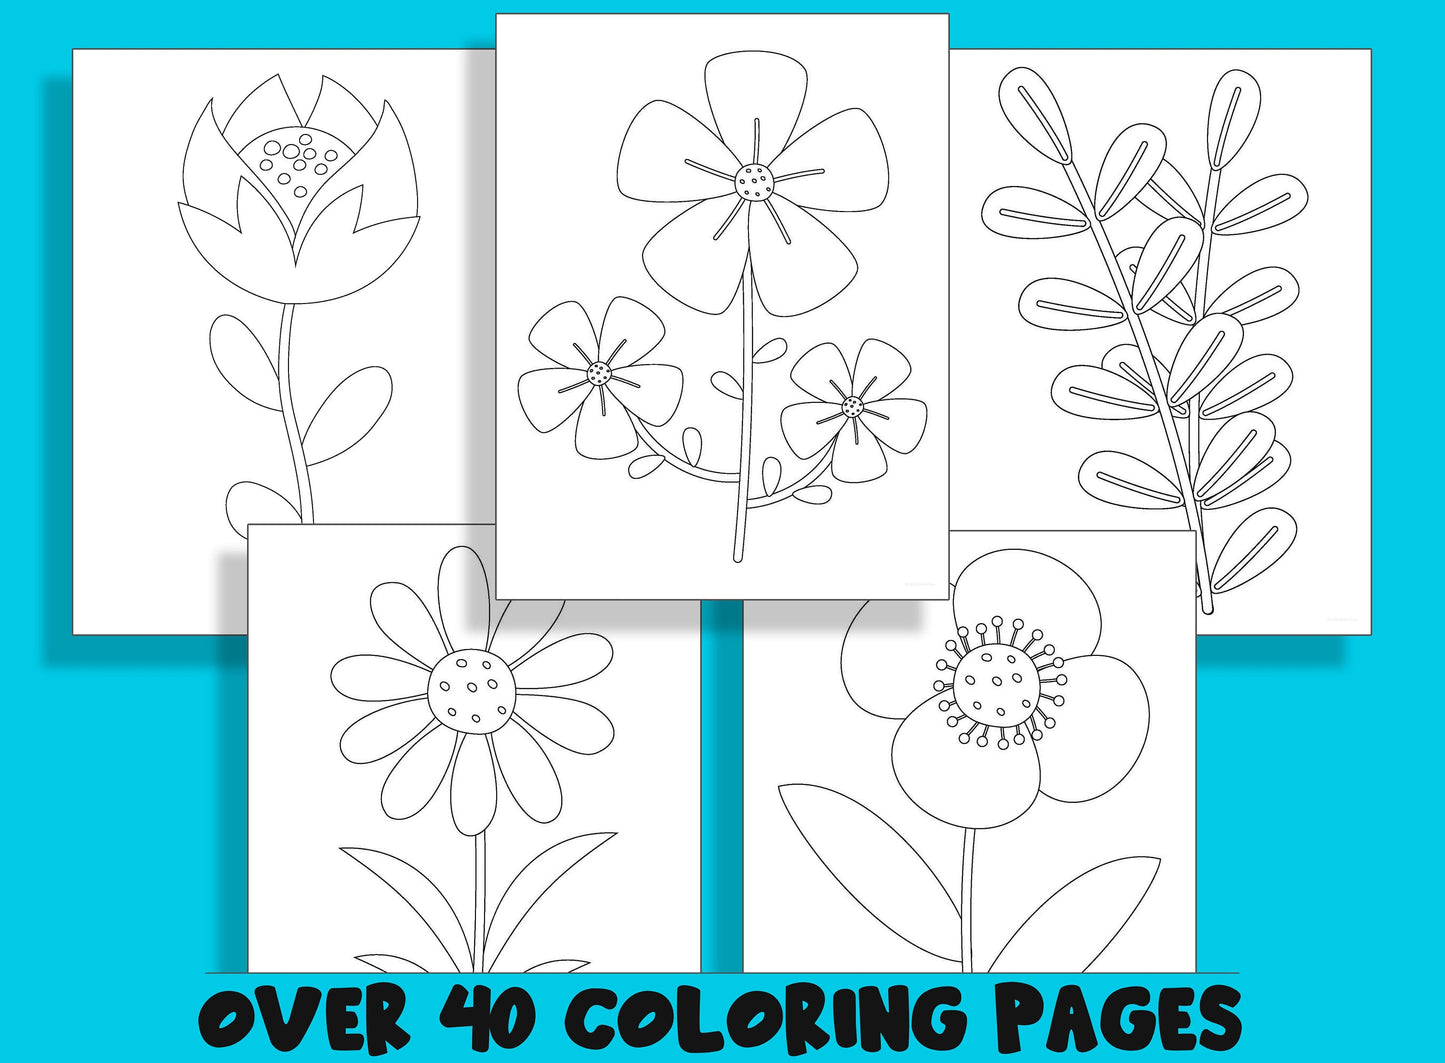 Flowers Leaves Coloring Book, 40 Printable Coloring Pages for Kids a fun way for kids of all ages to develop creativity, focus, motor skills